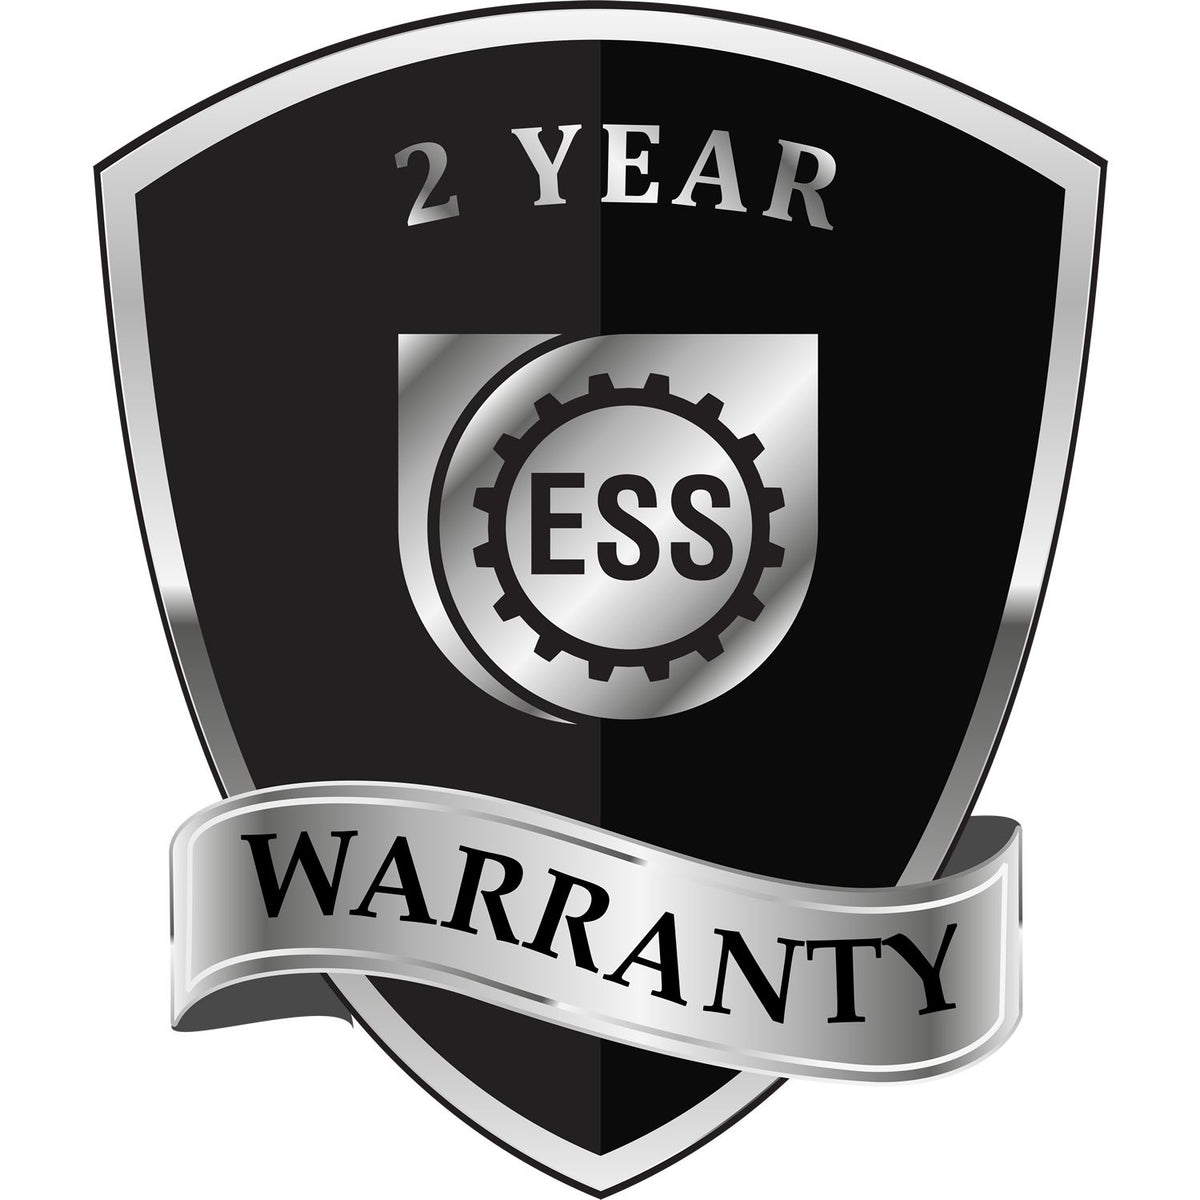 A badge or emblem showing a warranty icon for the Handheld Mississippi Professional Engineer Embosser